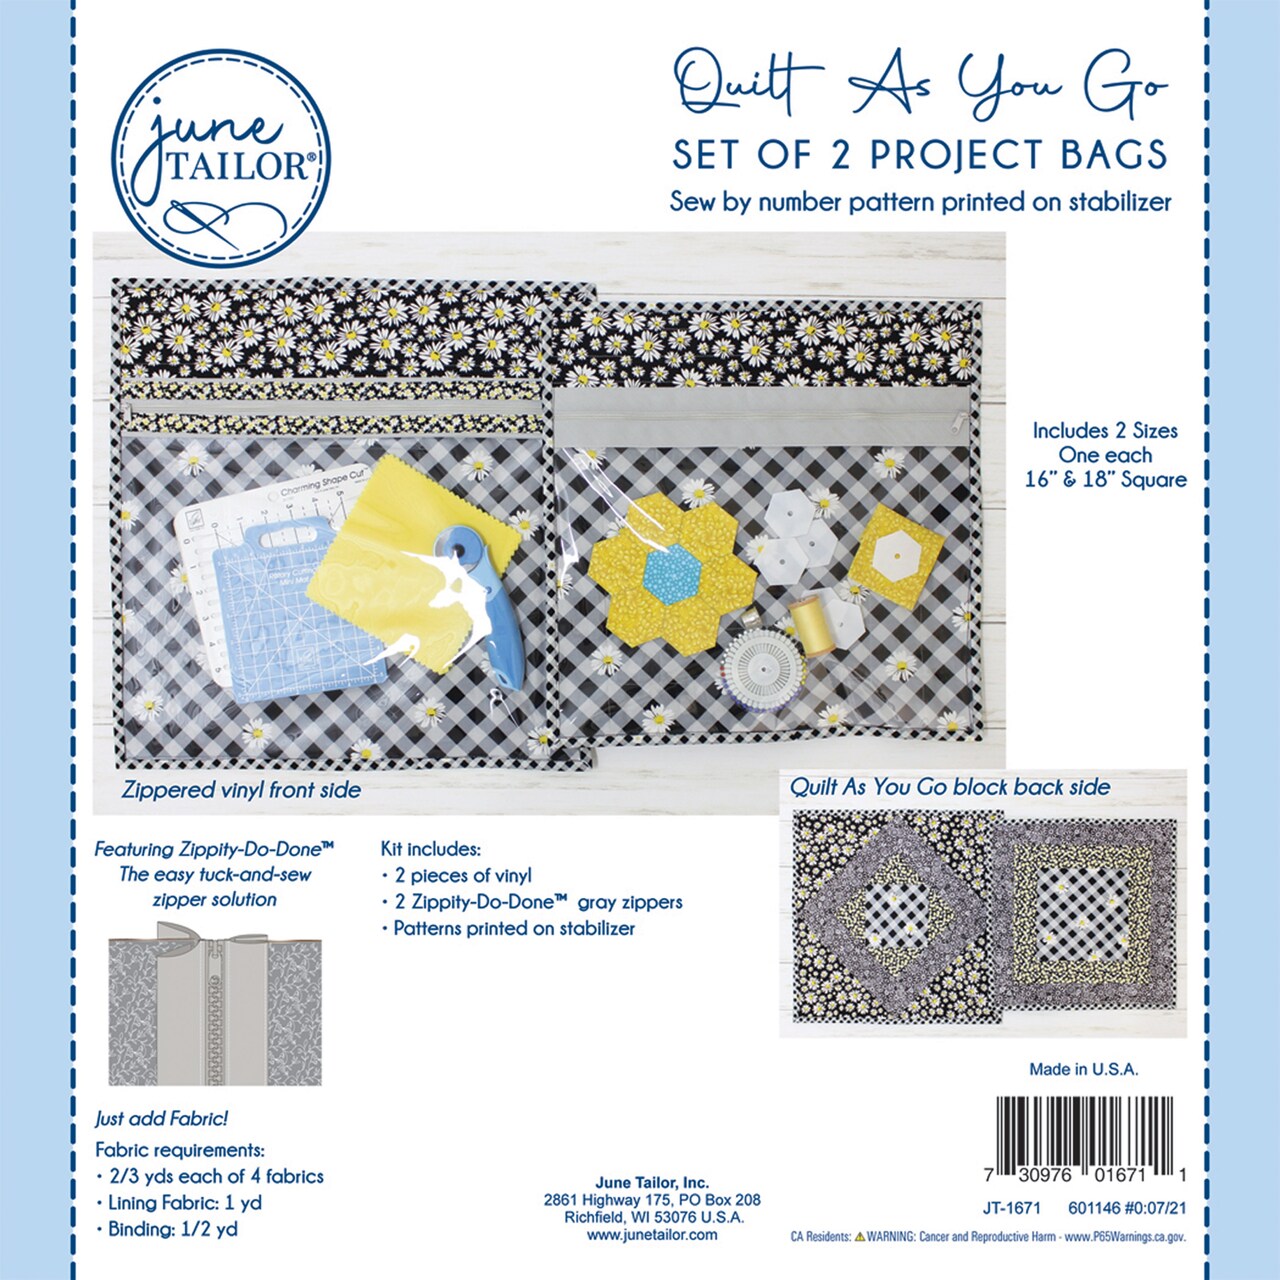 June Tailor Quilt As You Go Project Bag Kit-Gray Zippity-Do-Done(Tm)